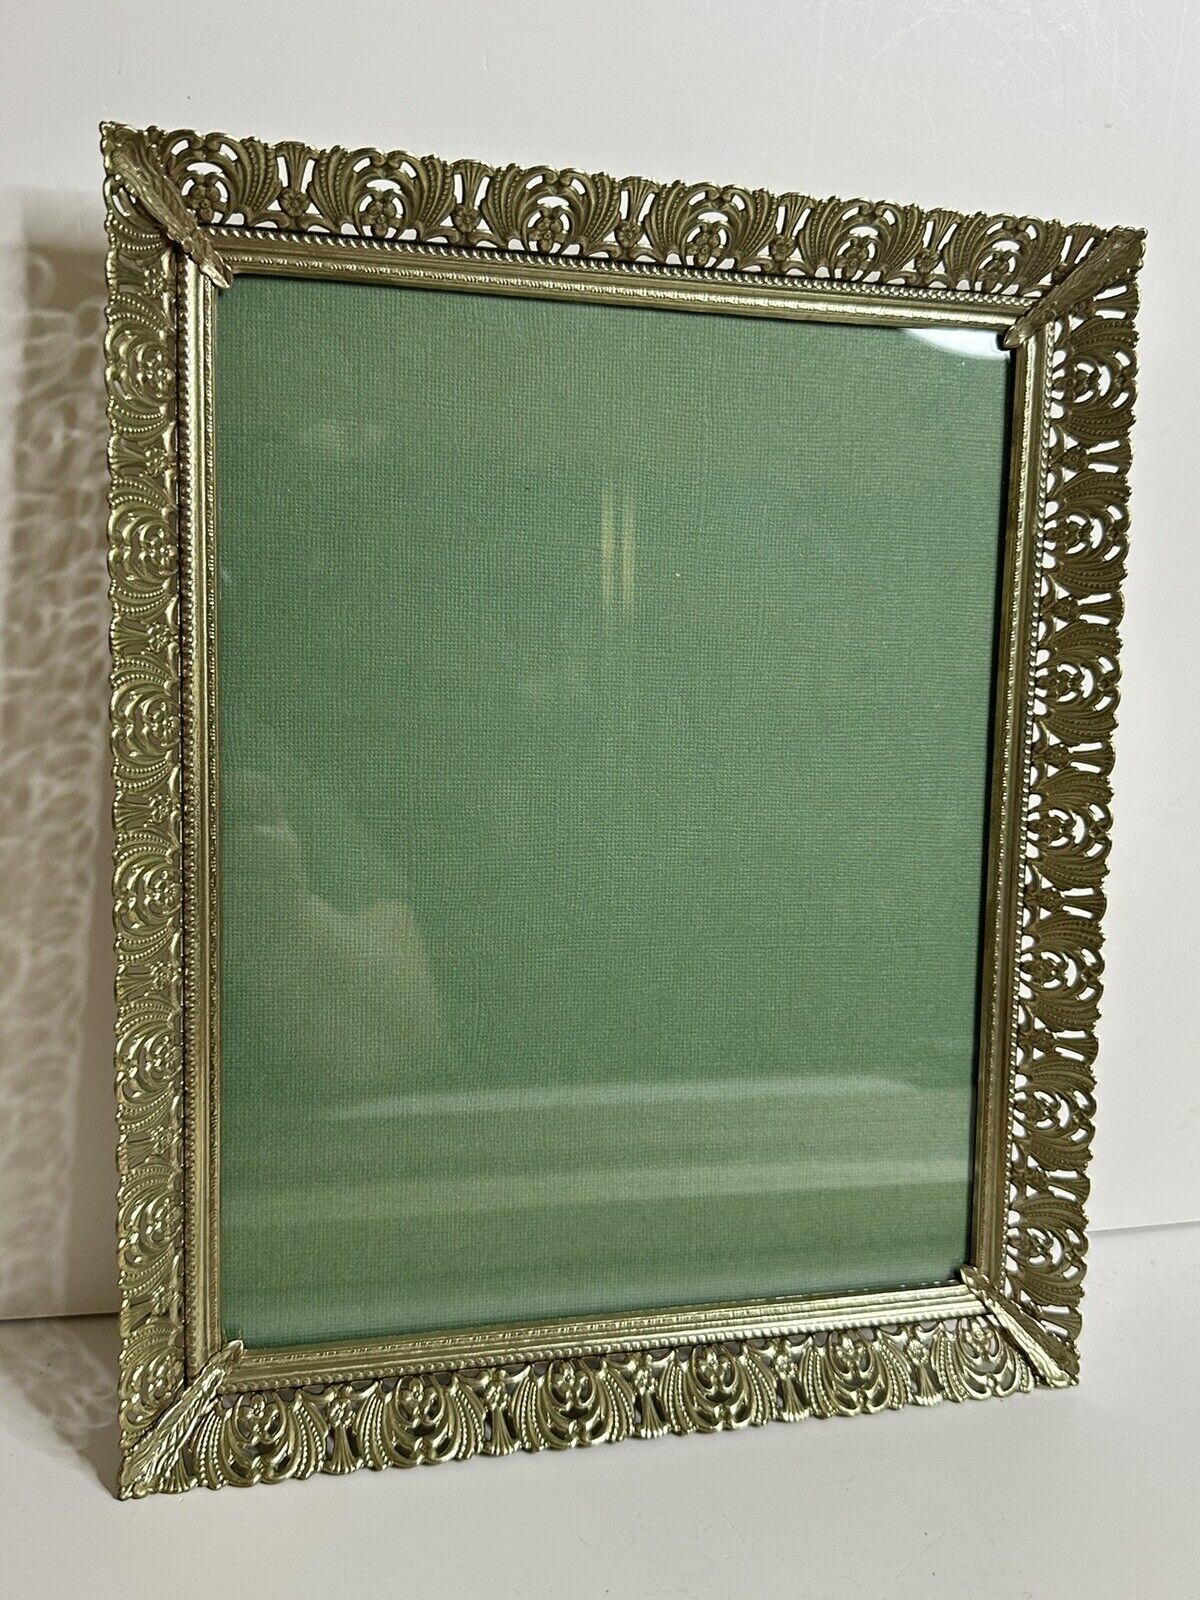 Vintage Gold Filigree Metal Picture Wall Frame 11.5” x9.5” 